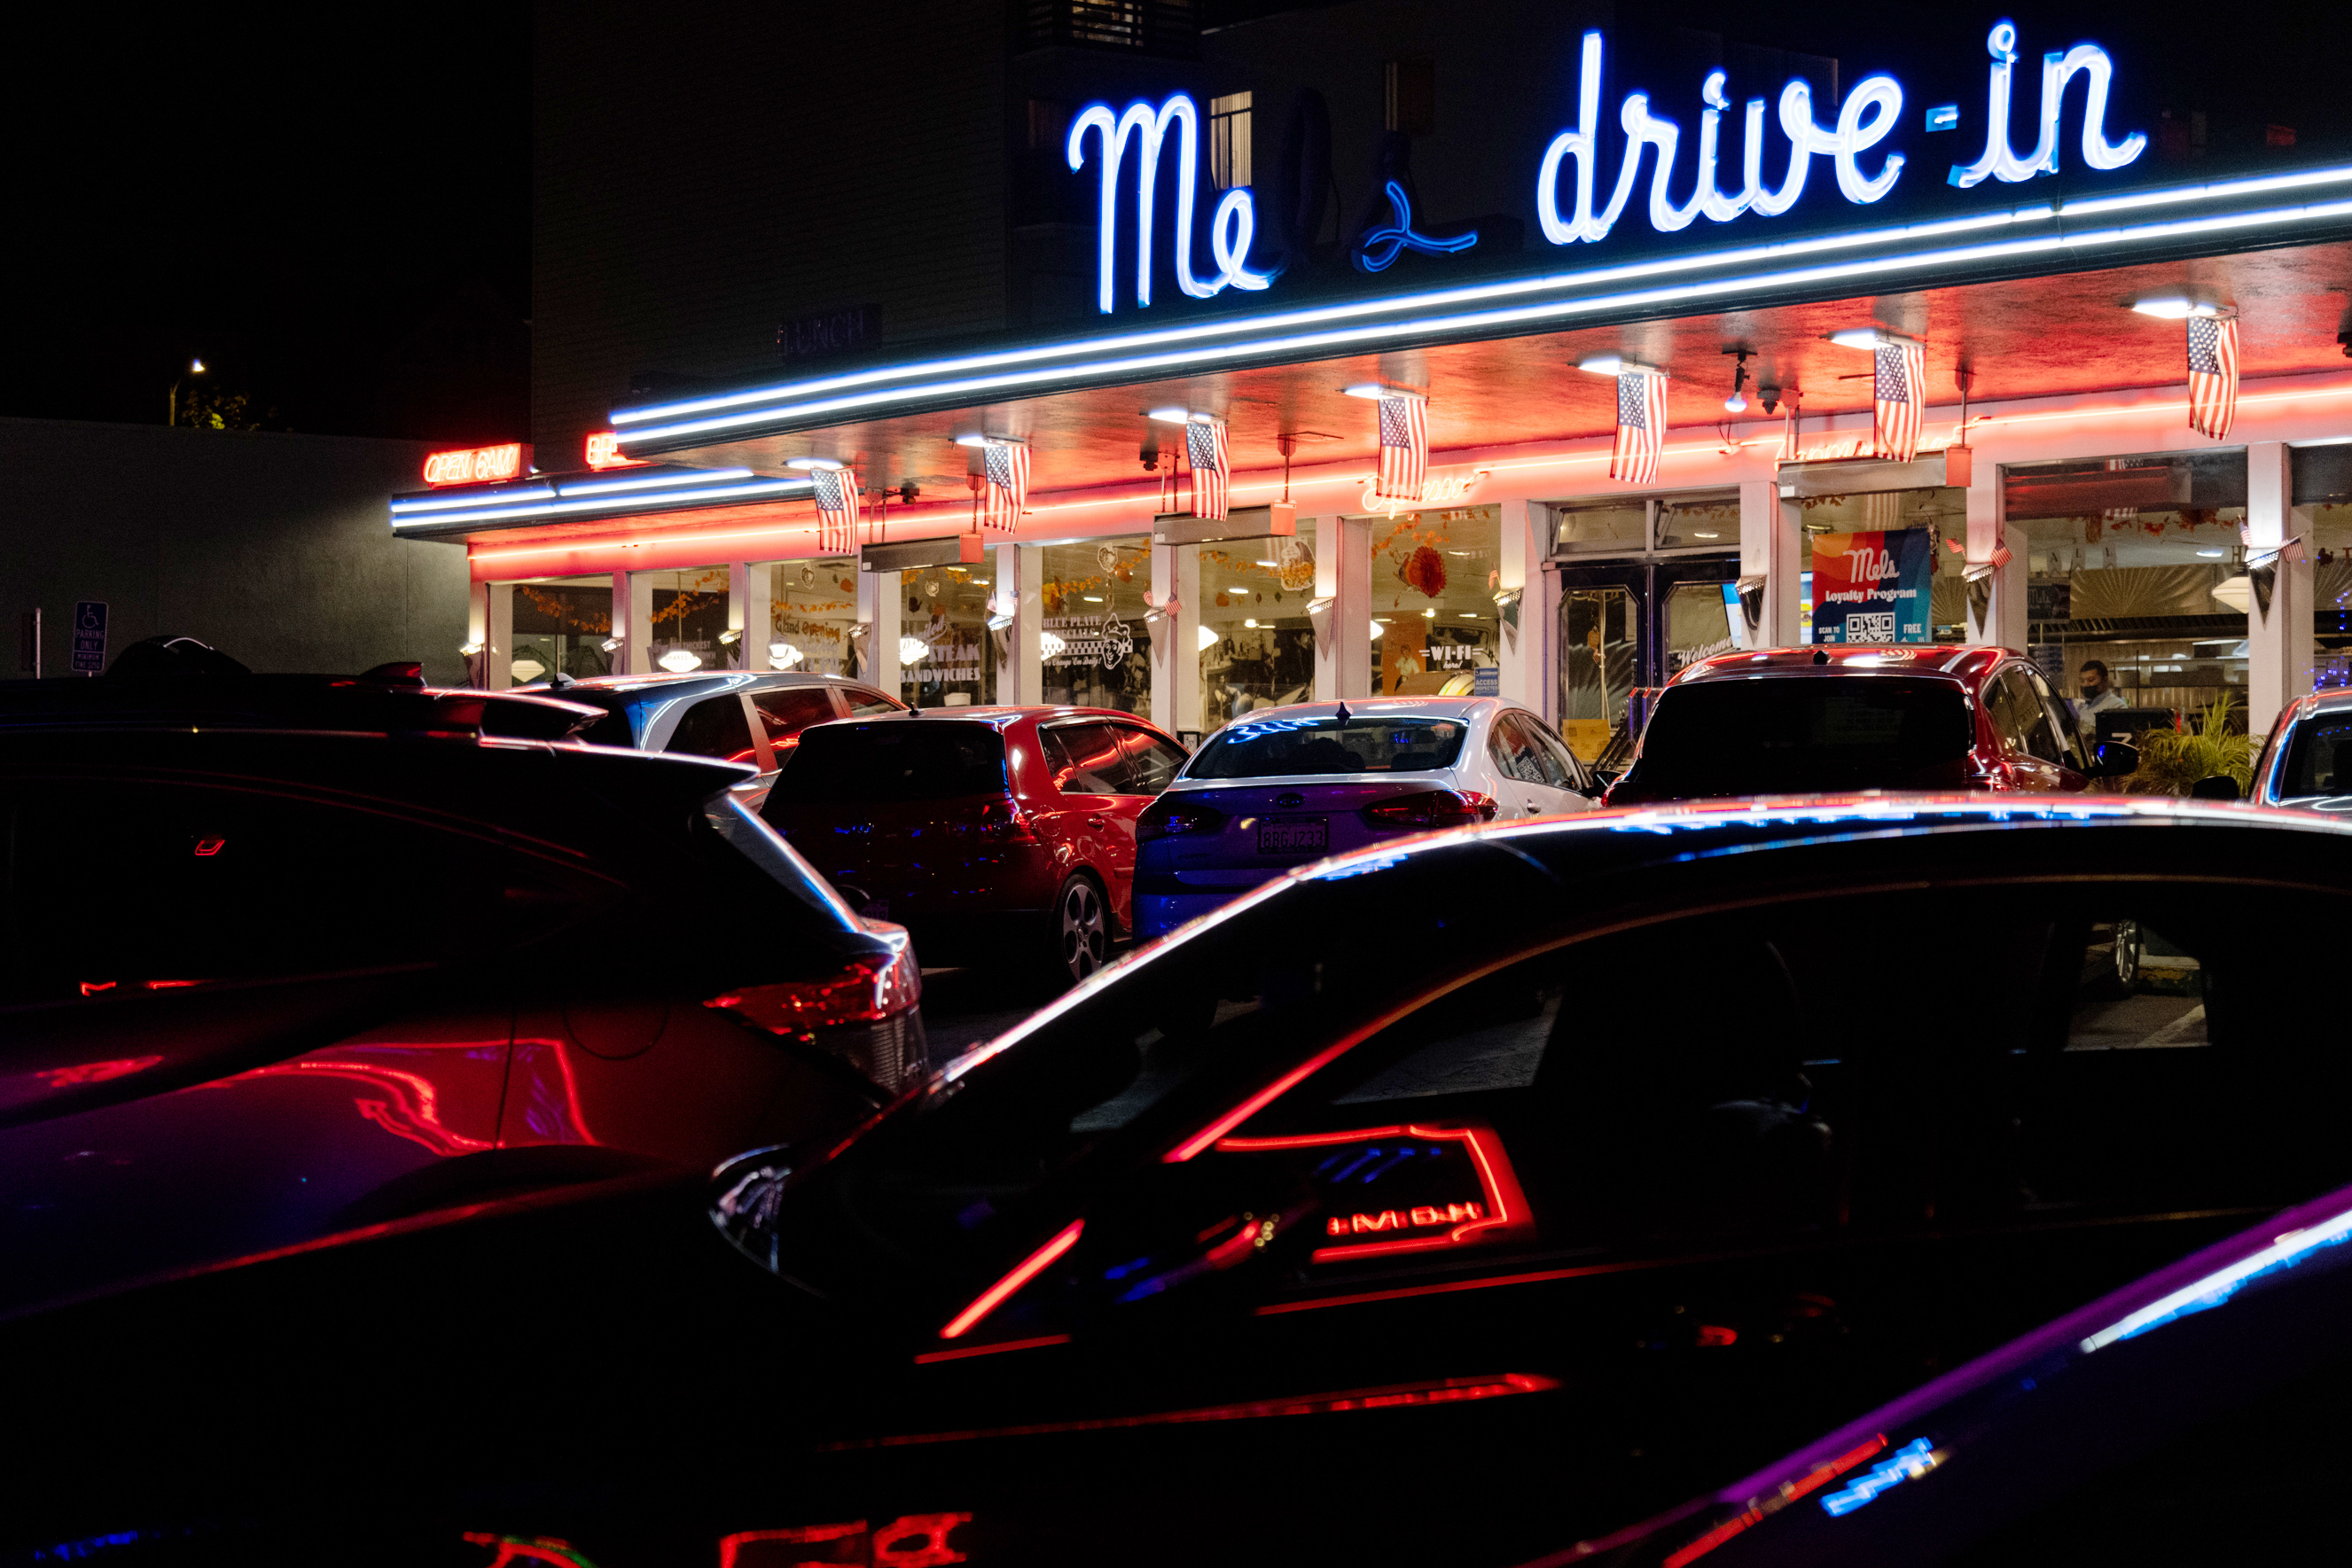 A neon sign at night with the words &quot;Mels Drive-in&quot;